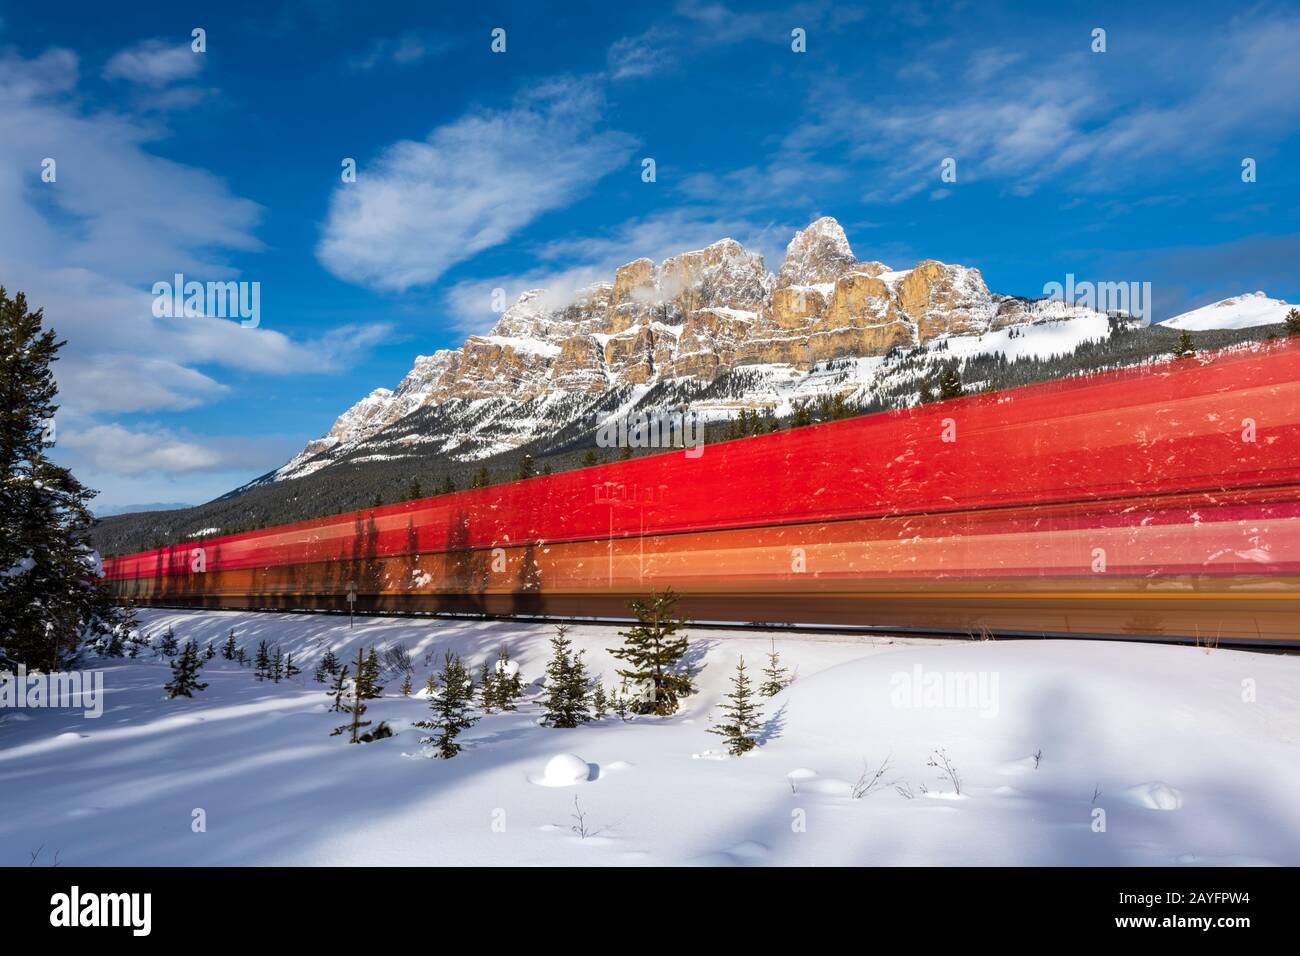 Long exposure of red locomotive passing Castle Mountain in winter near Banff, Alberta, Canada Stock Photo